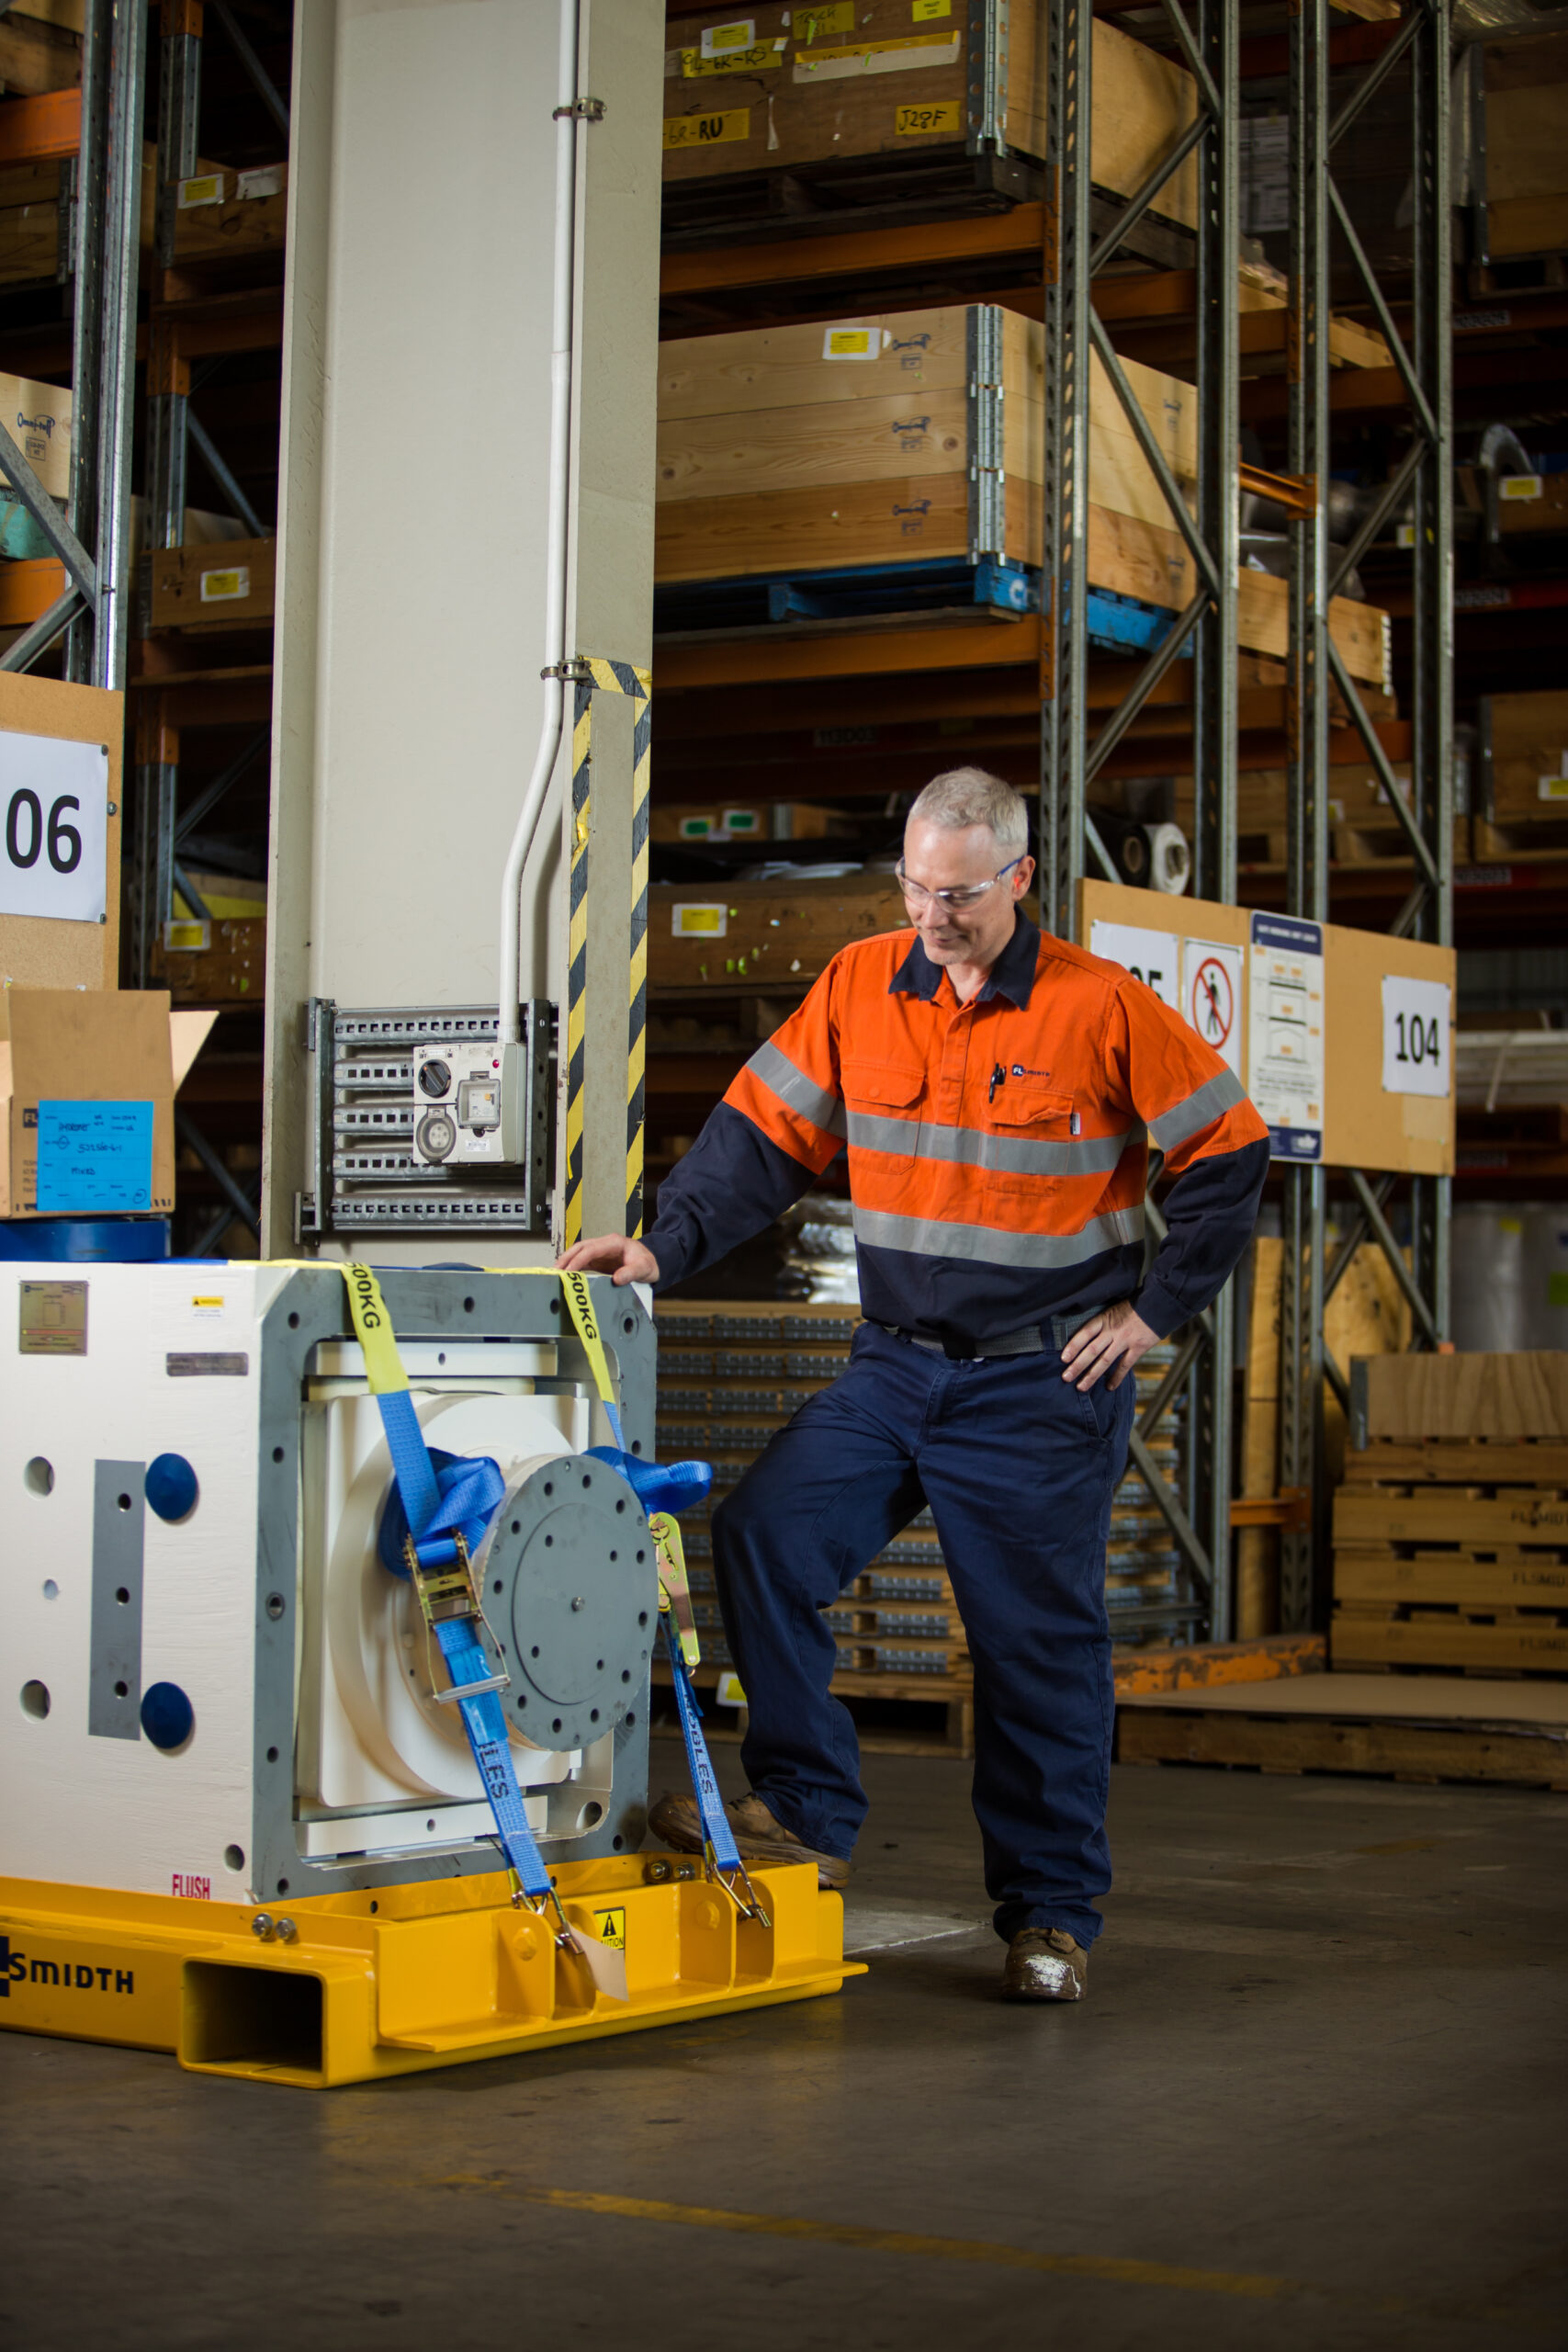 man in hivis securing a component in a warehouse